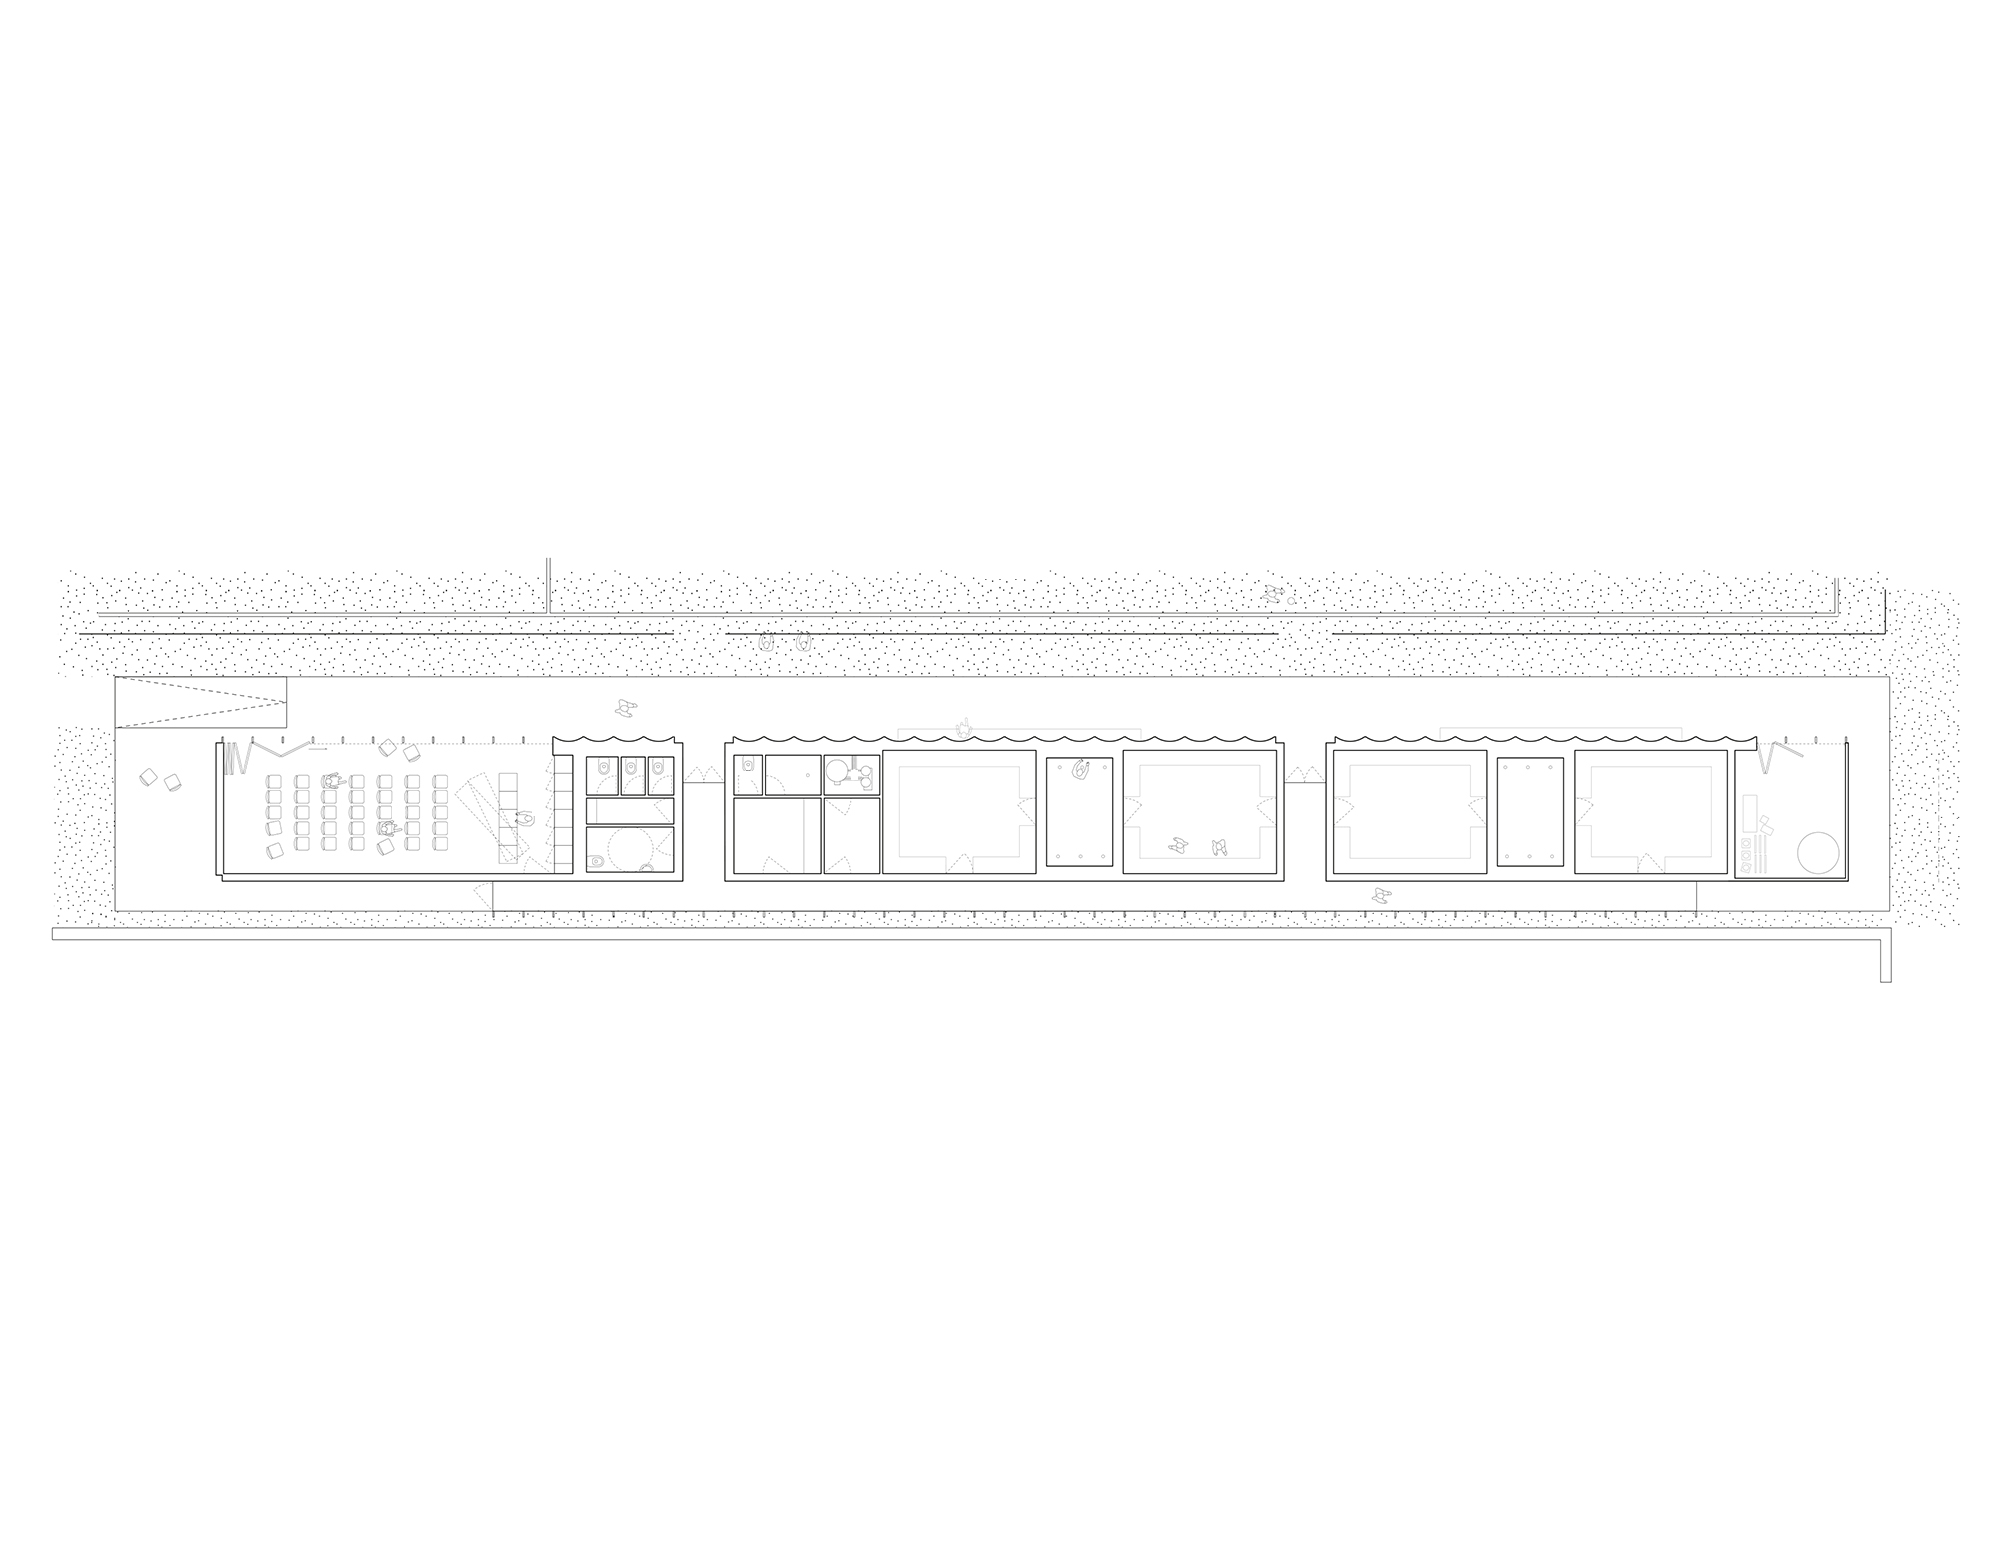 01-plan-clubhouse-football-nu-architecture-ingenierie